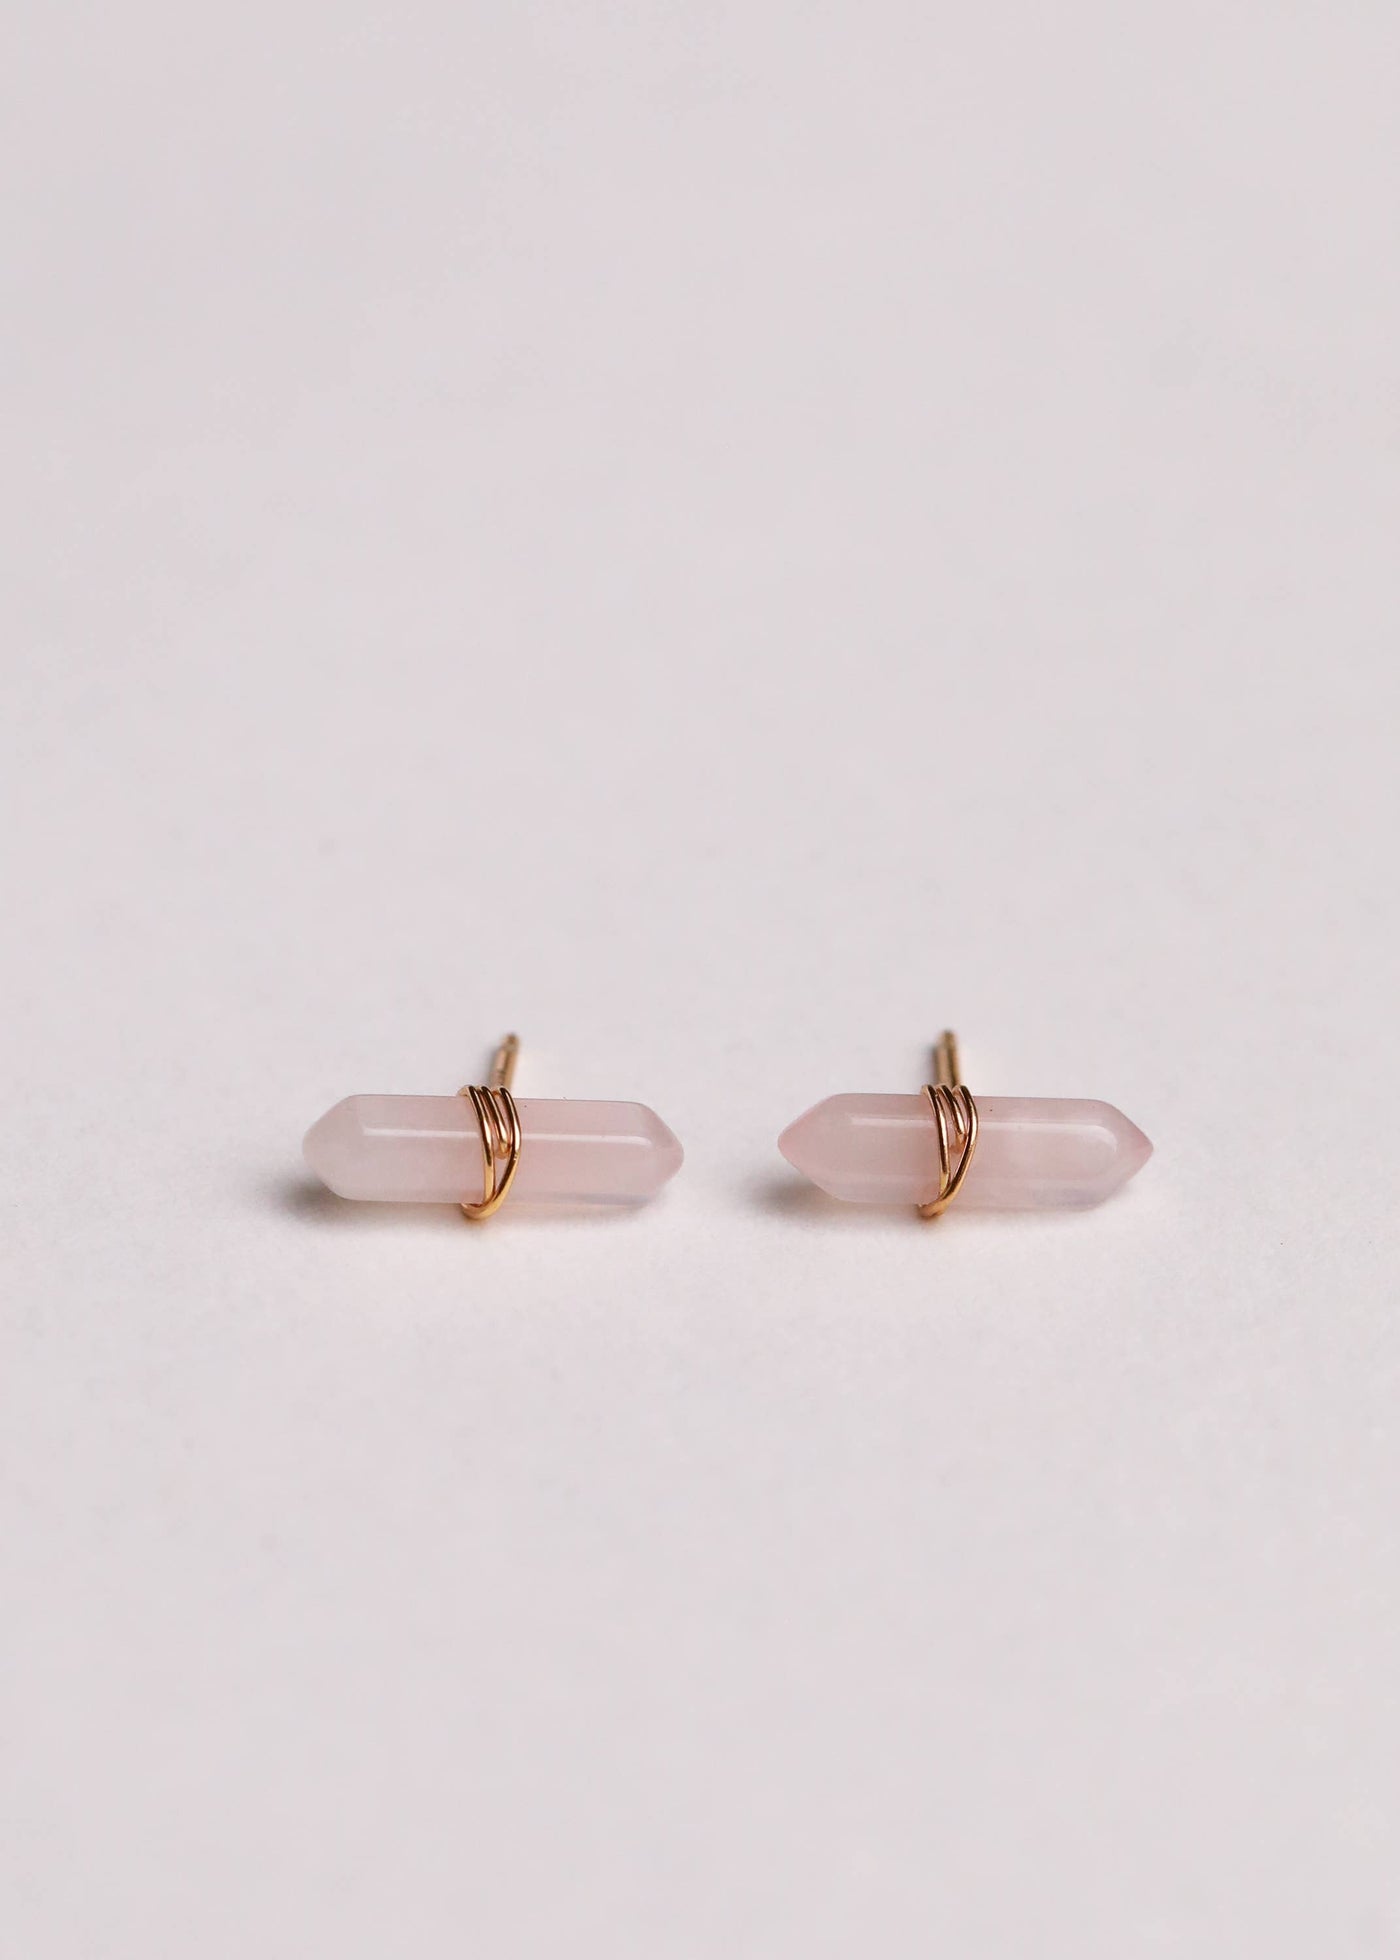 Rose Quartz Mineral Point - The Lake and Company